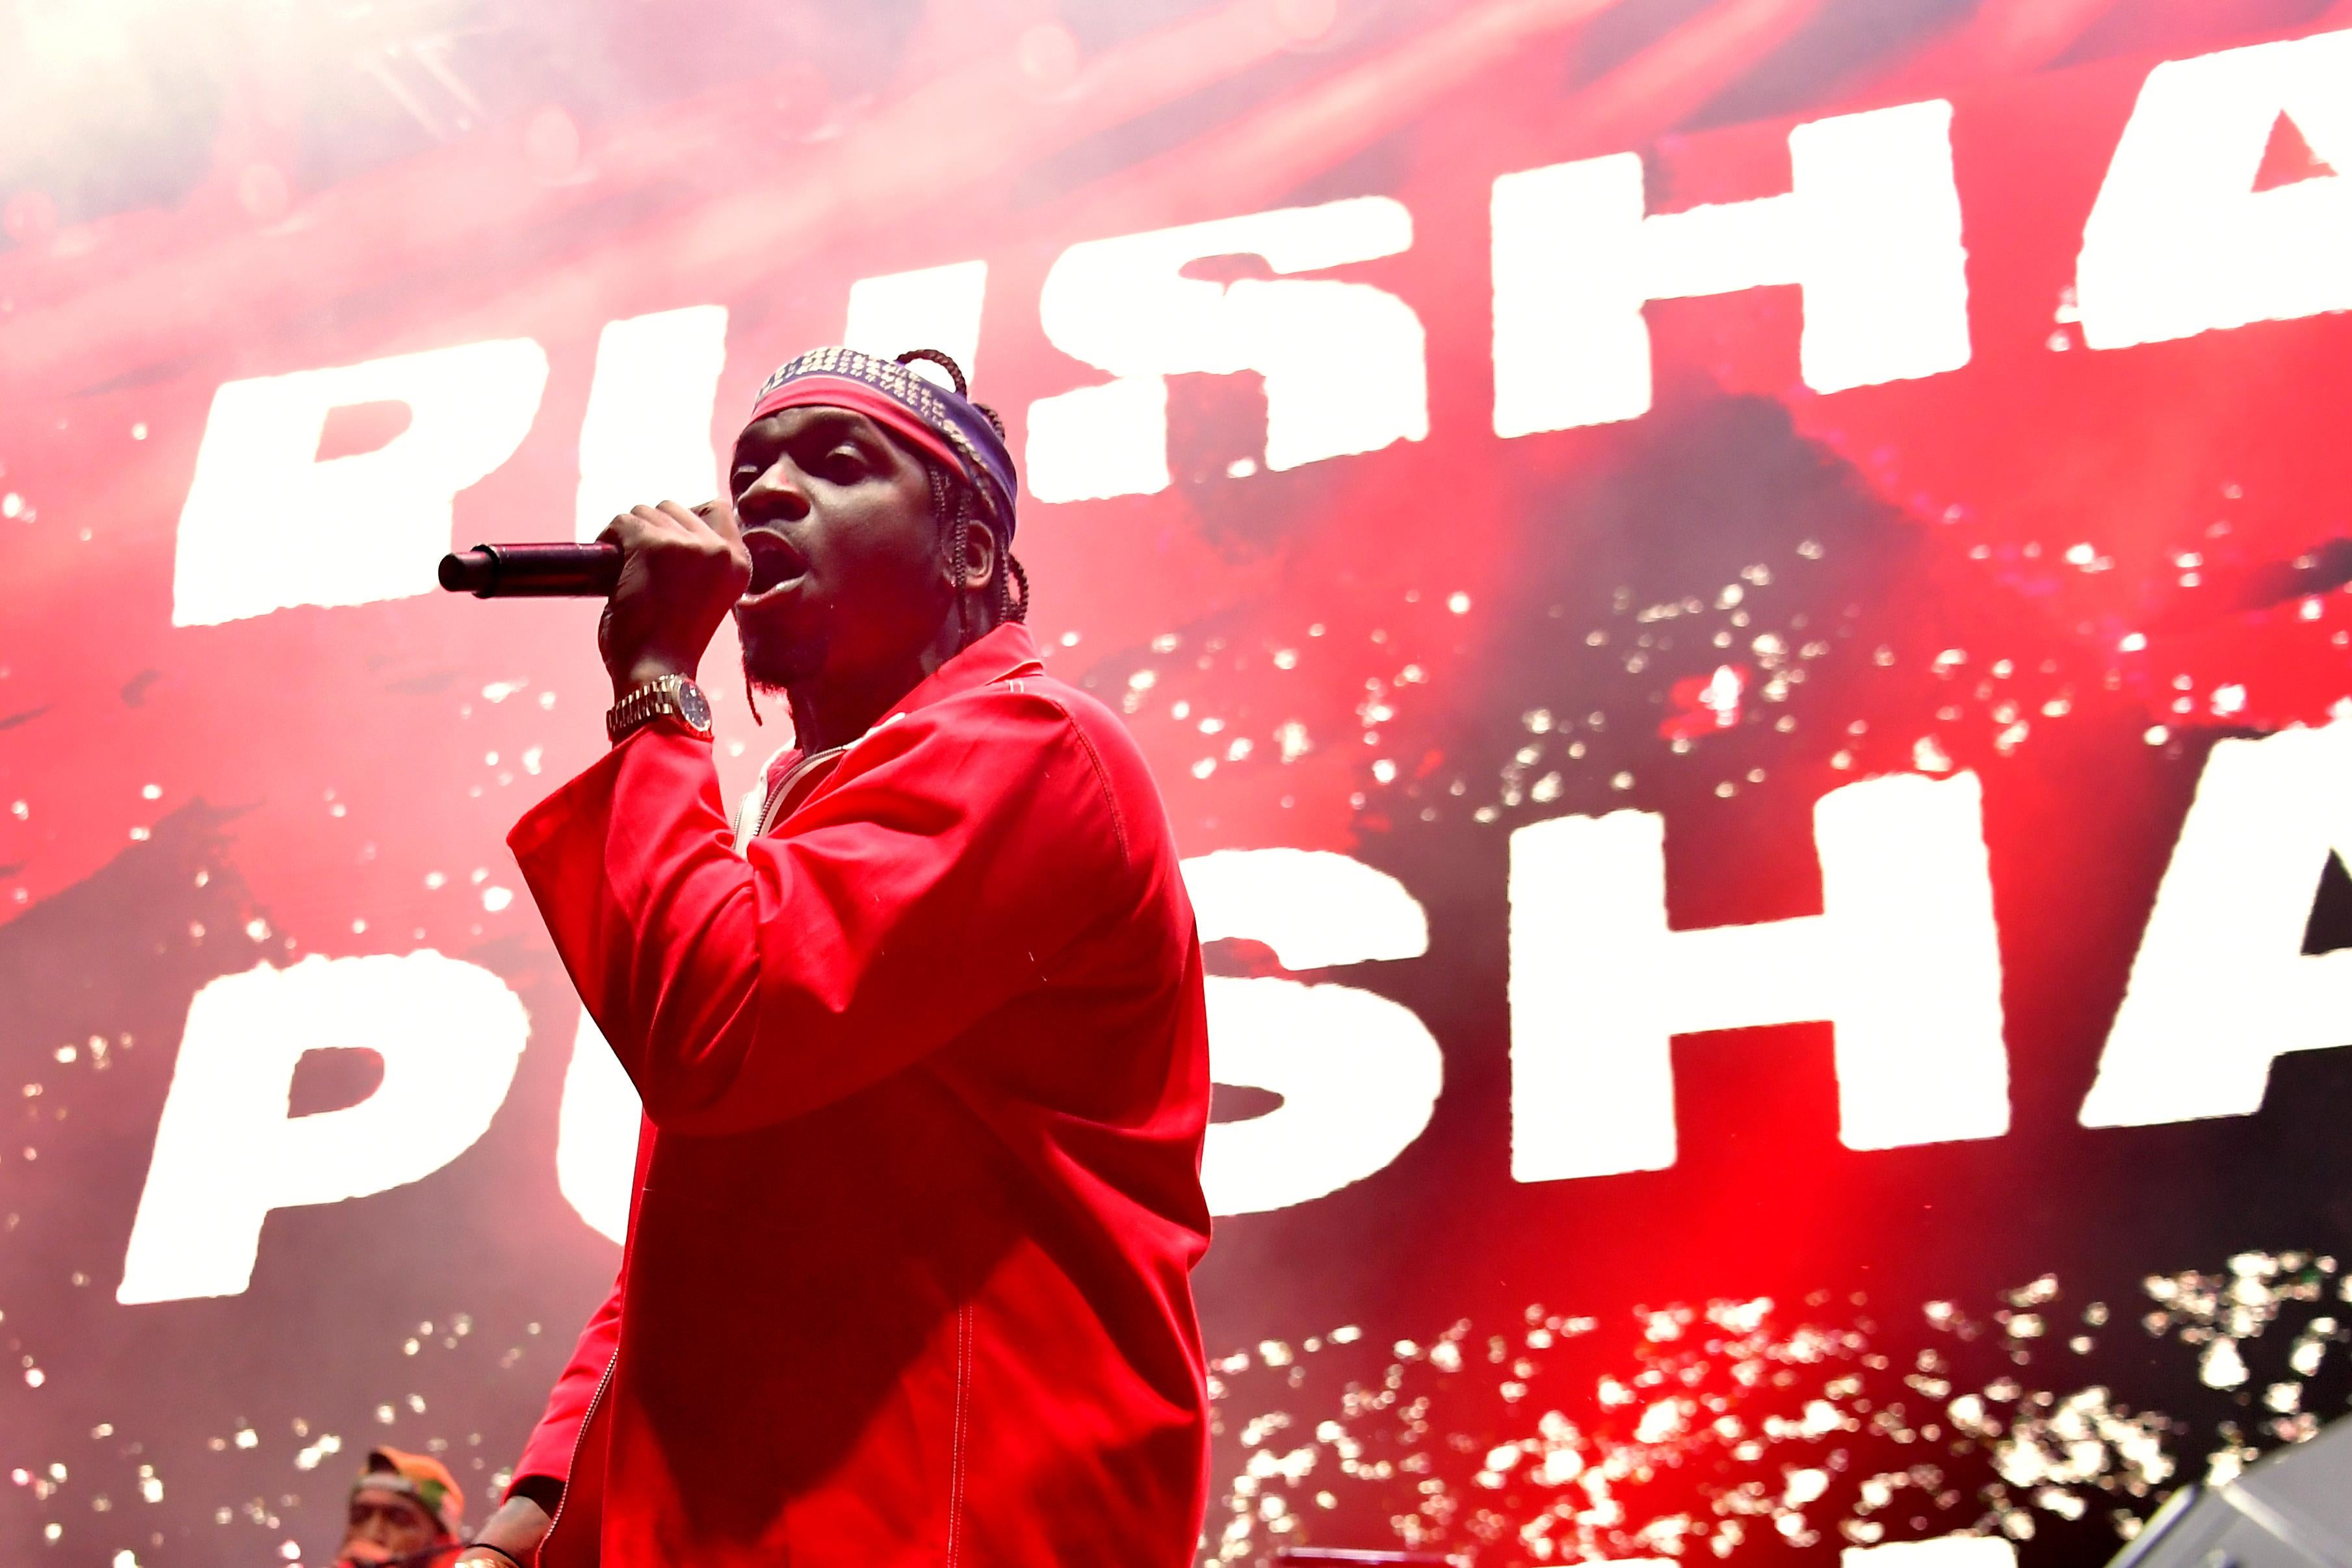 Pusha T performing in Los Angeles in February, 2018.